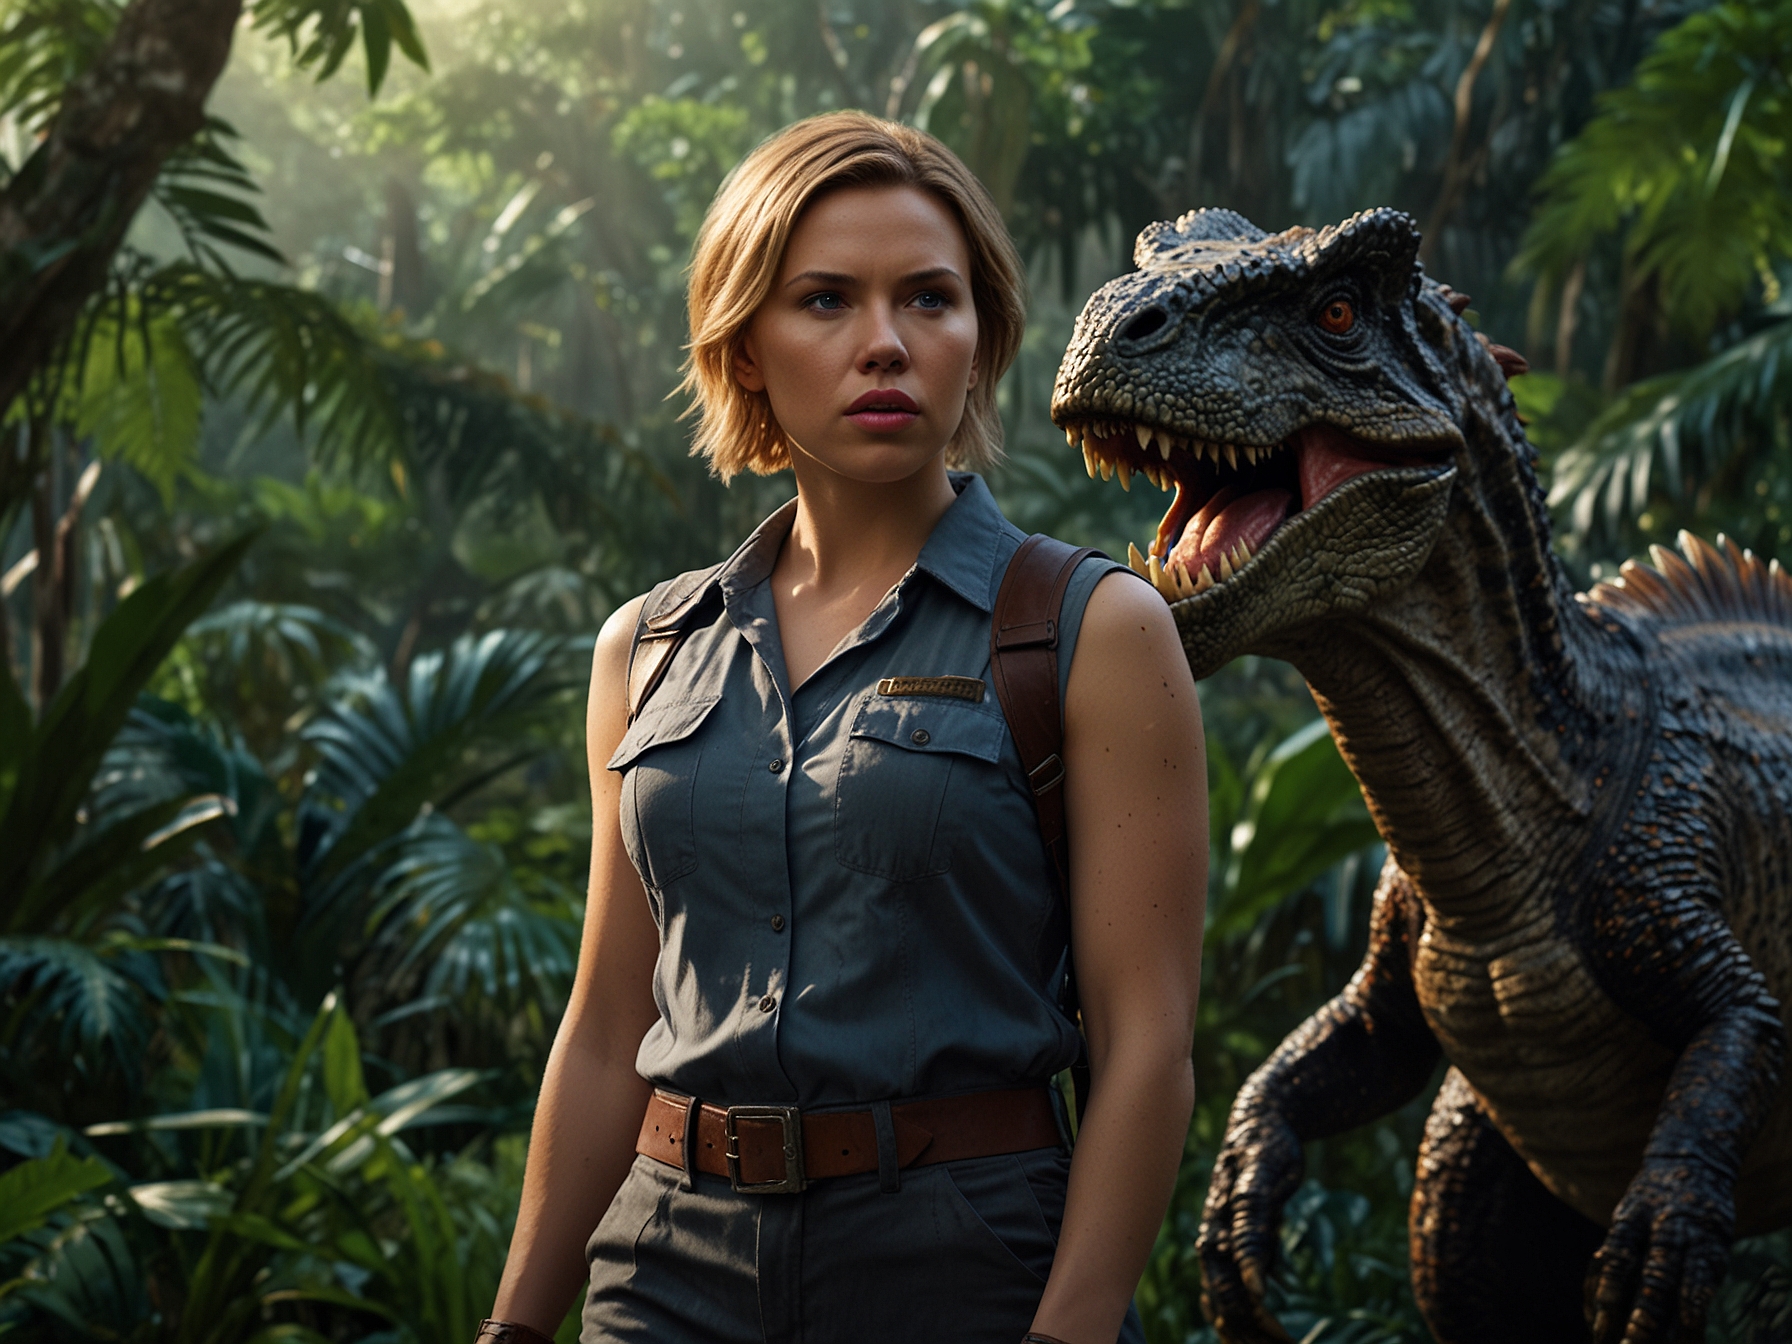 Scarlett Johansson, in costume, stands against a backdrop of lush jungle setting, showcasing her character's adventurous spirit and readiness to face thrilling dinosaur encounters in ‘Jurassic World 4’.